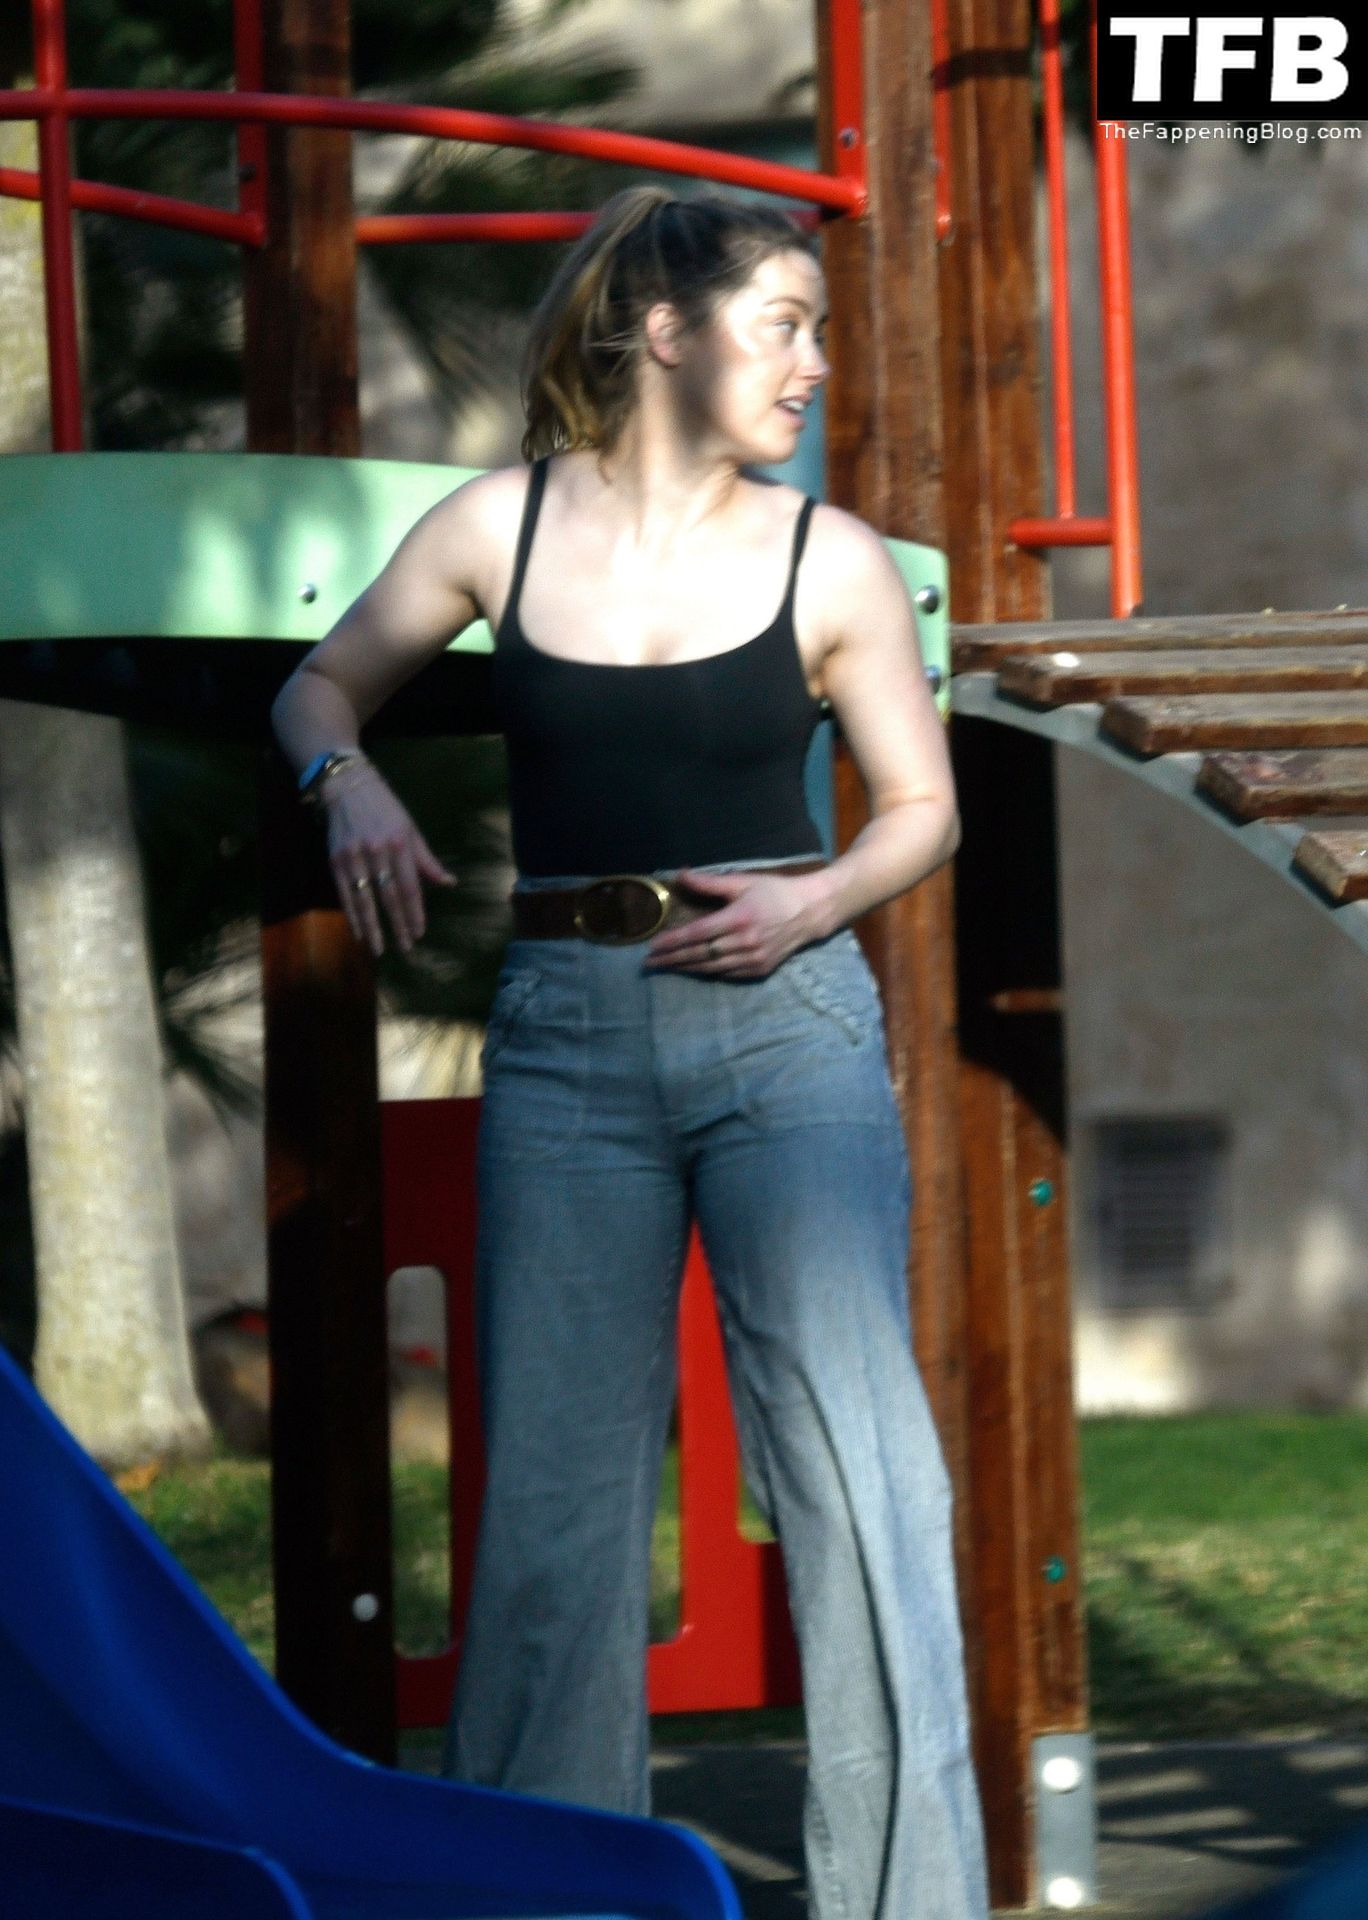 Amber Heard Sexy The Fappening Blog 9 - Amber Heard Continues to Get Away From It All During her Spanish Vacation in Palma De Mallorca (26 Photos)